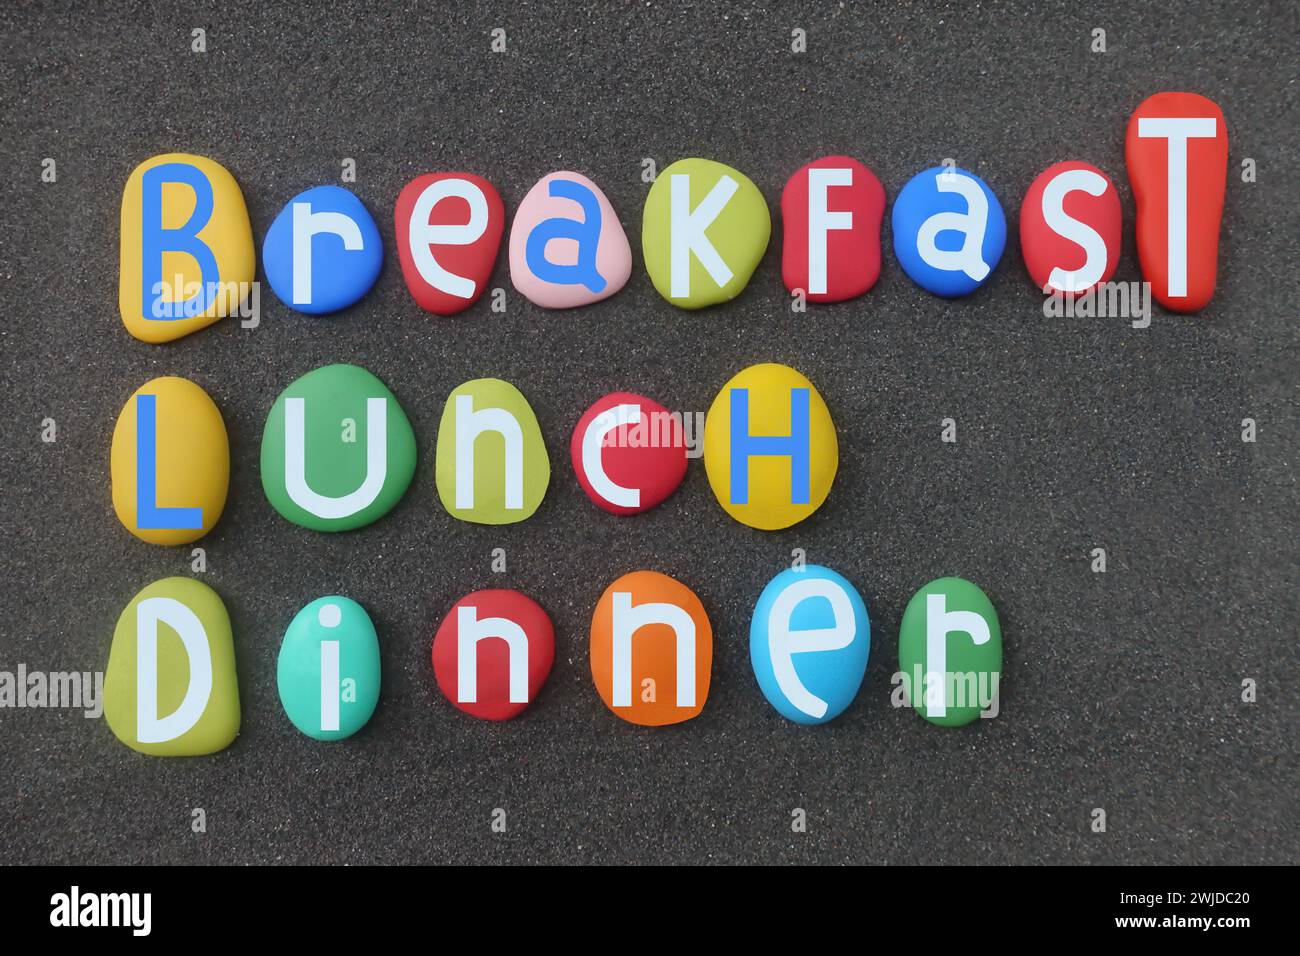 Breakfast, lunch, dinner, creative text art composed with hand painted multi colored stone letters over black volcanic sand Stock Photo